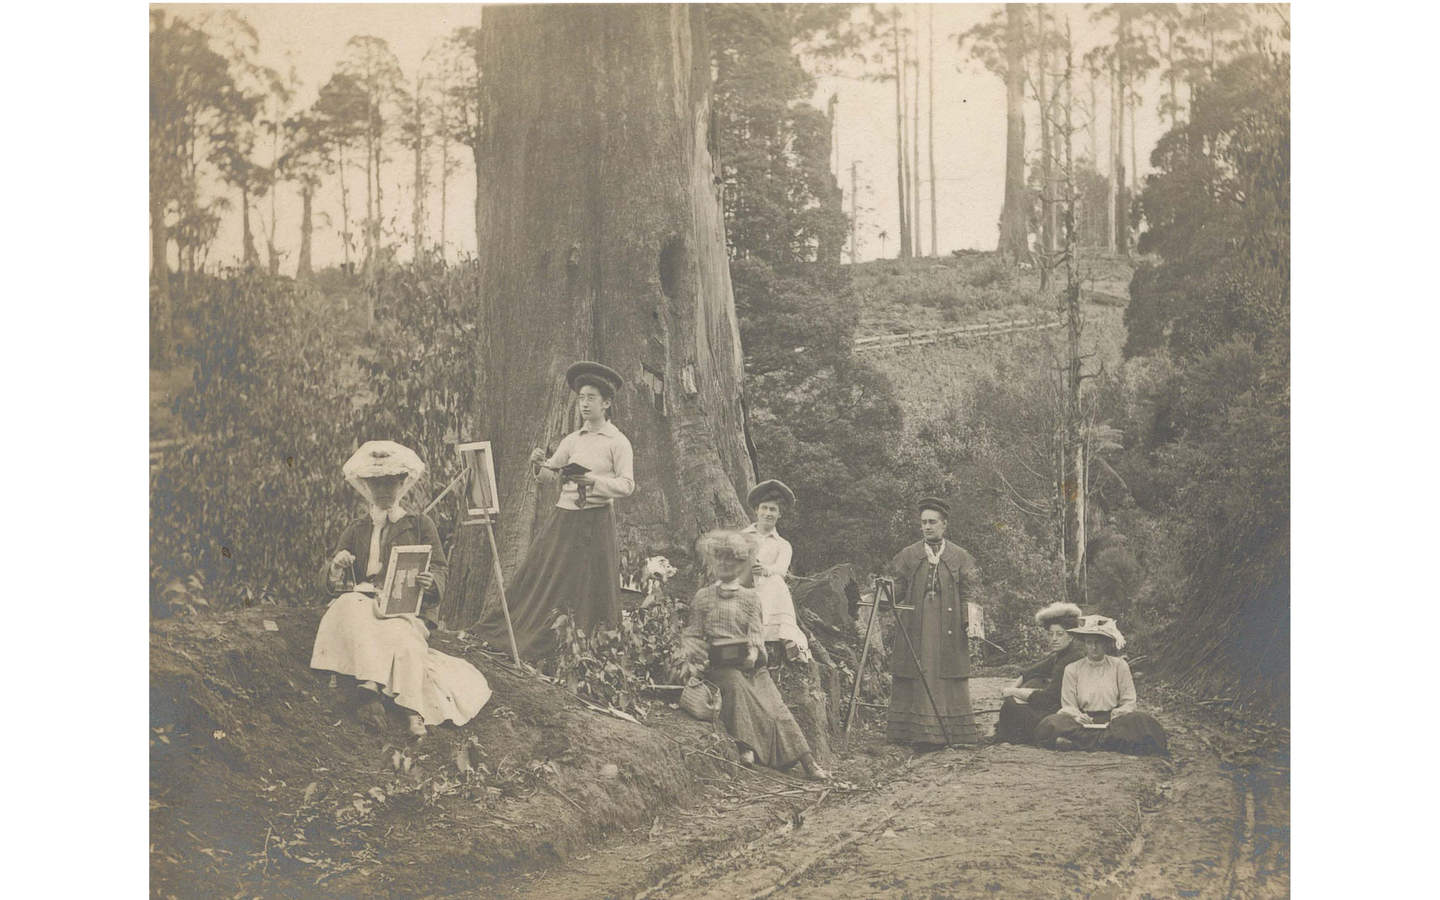 Black and white photograph of early 20th century women seated and standing along a dirt path surrounded by large trees.